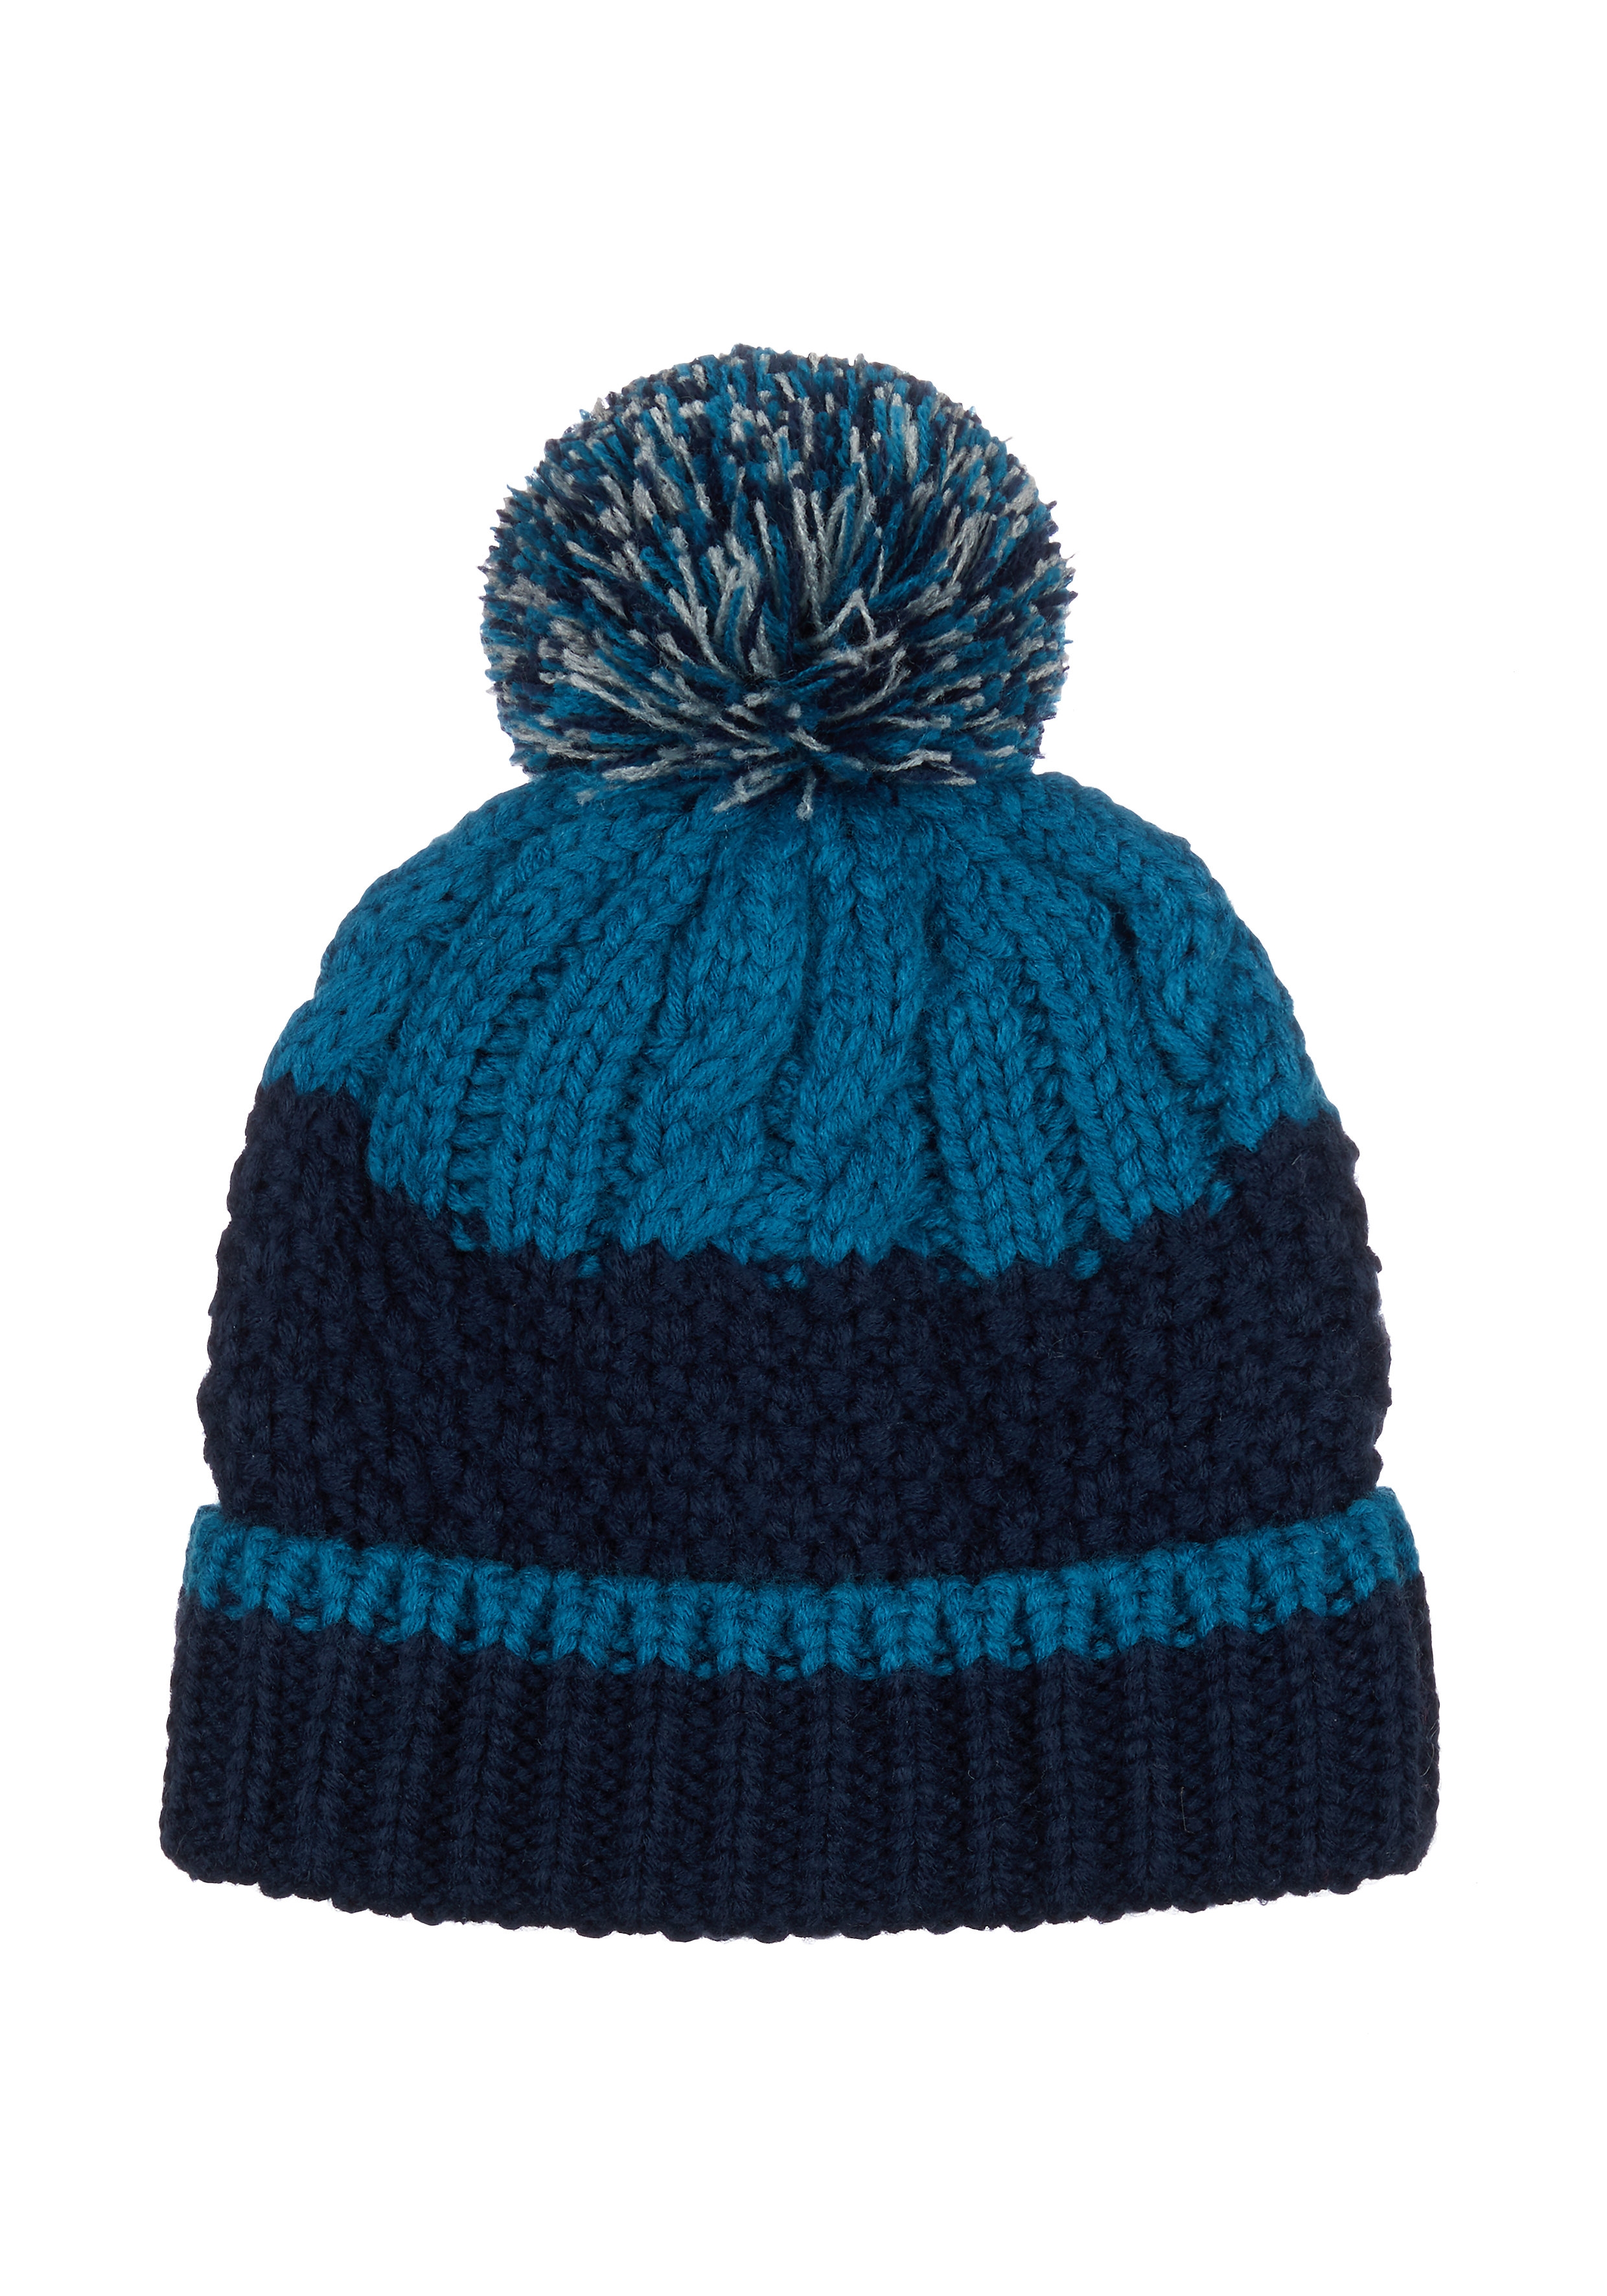 Mothercare | Boys Teal And Navy Cable - Knit Beanie Hat - Teal 0